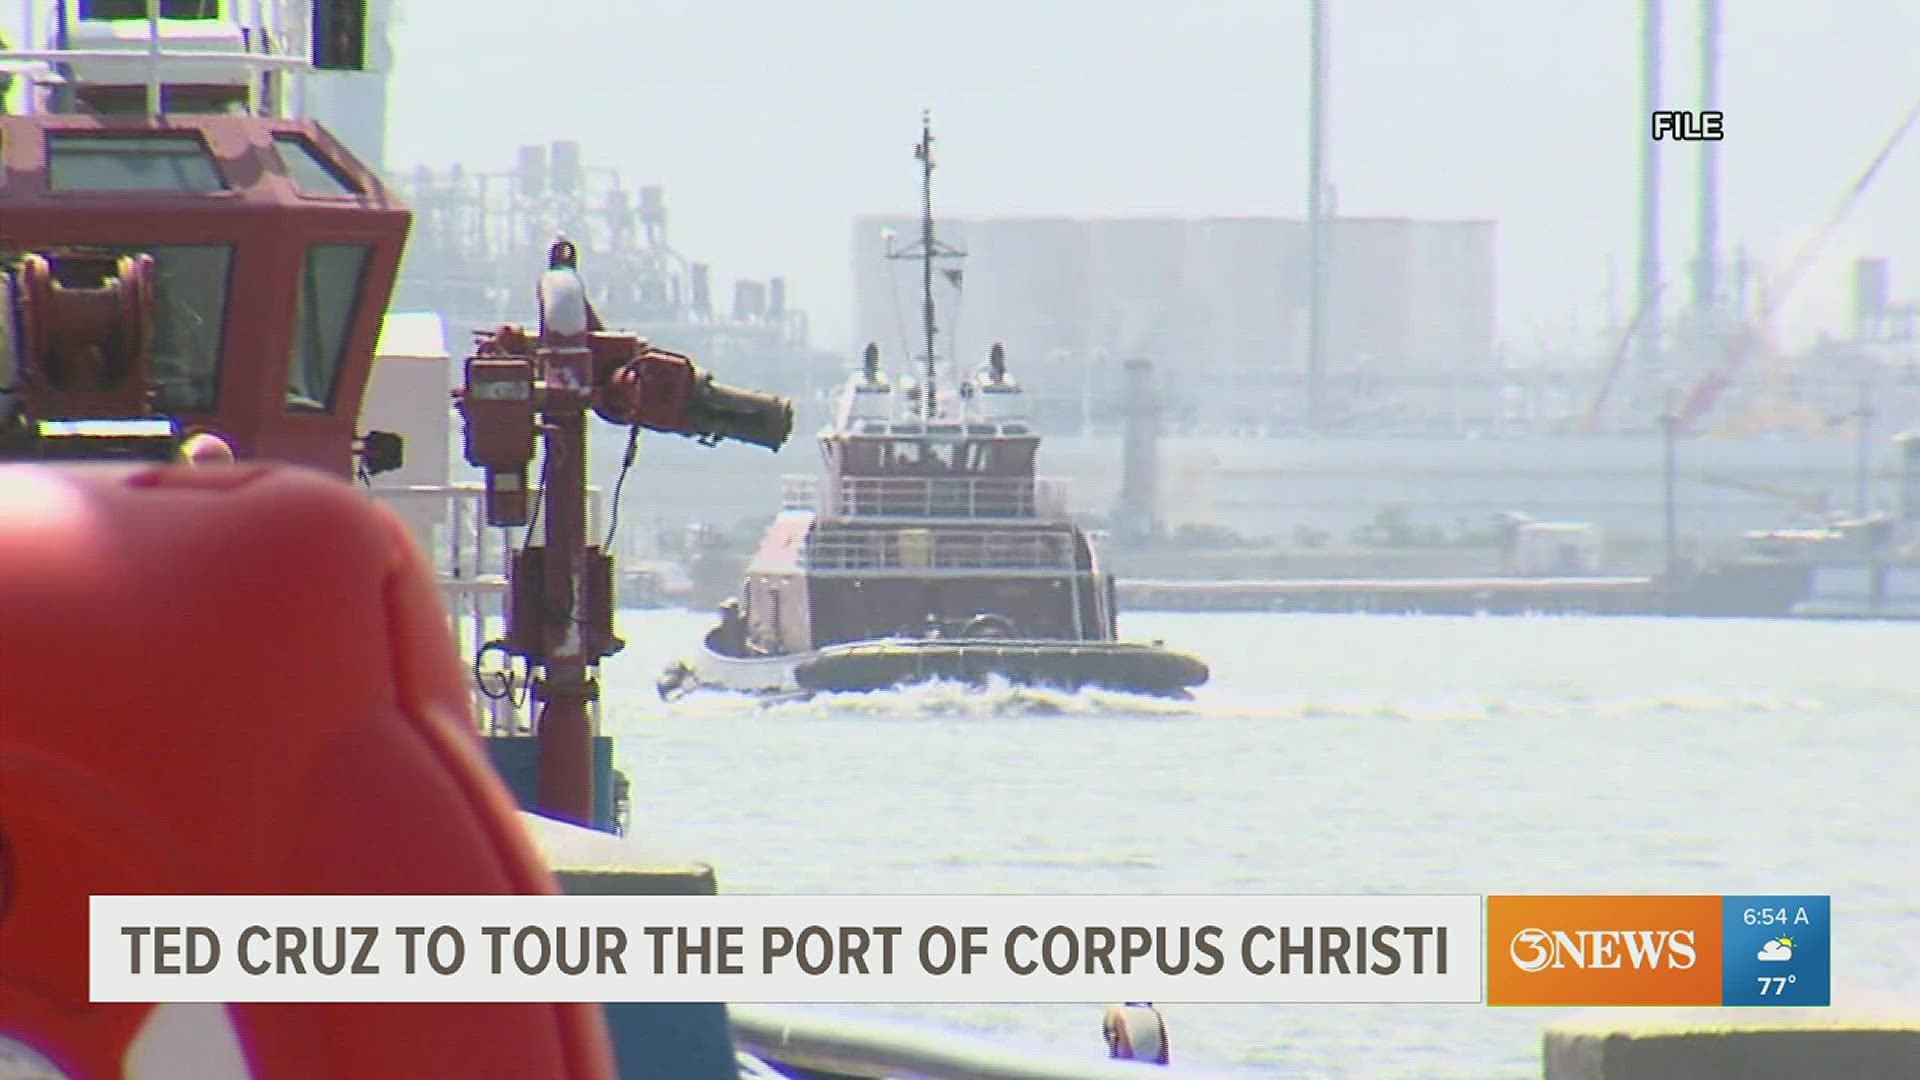 Cruz will tour the Port of Corpus Christi to talk about the needs of the port and community. 3NEWS will be there to cover the event.